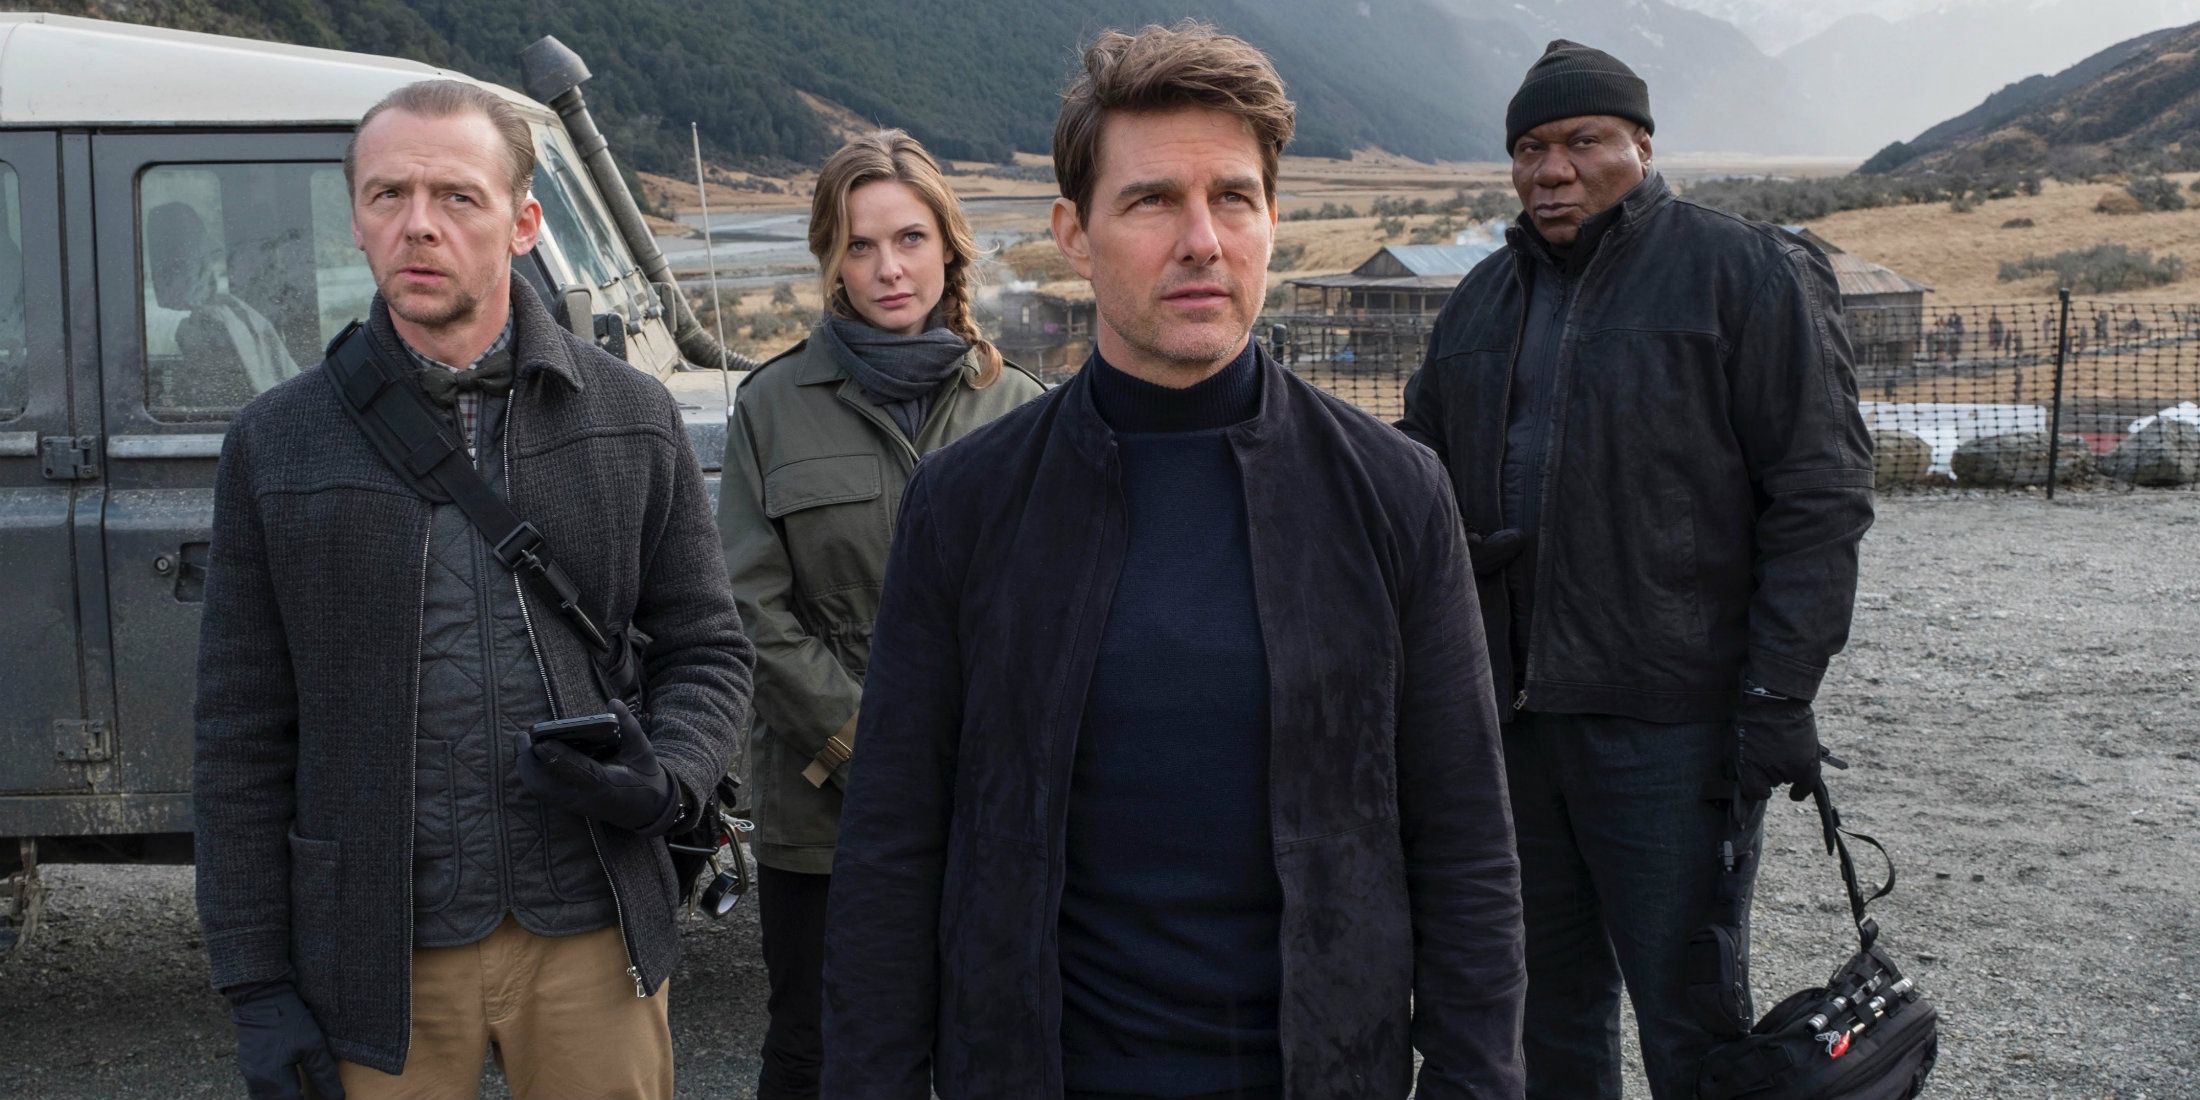 Mission Impossible Fallout Review The Action Movie of the Summer